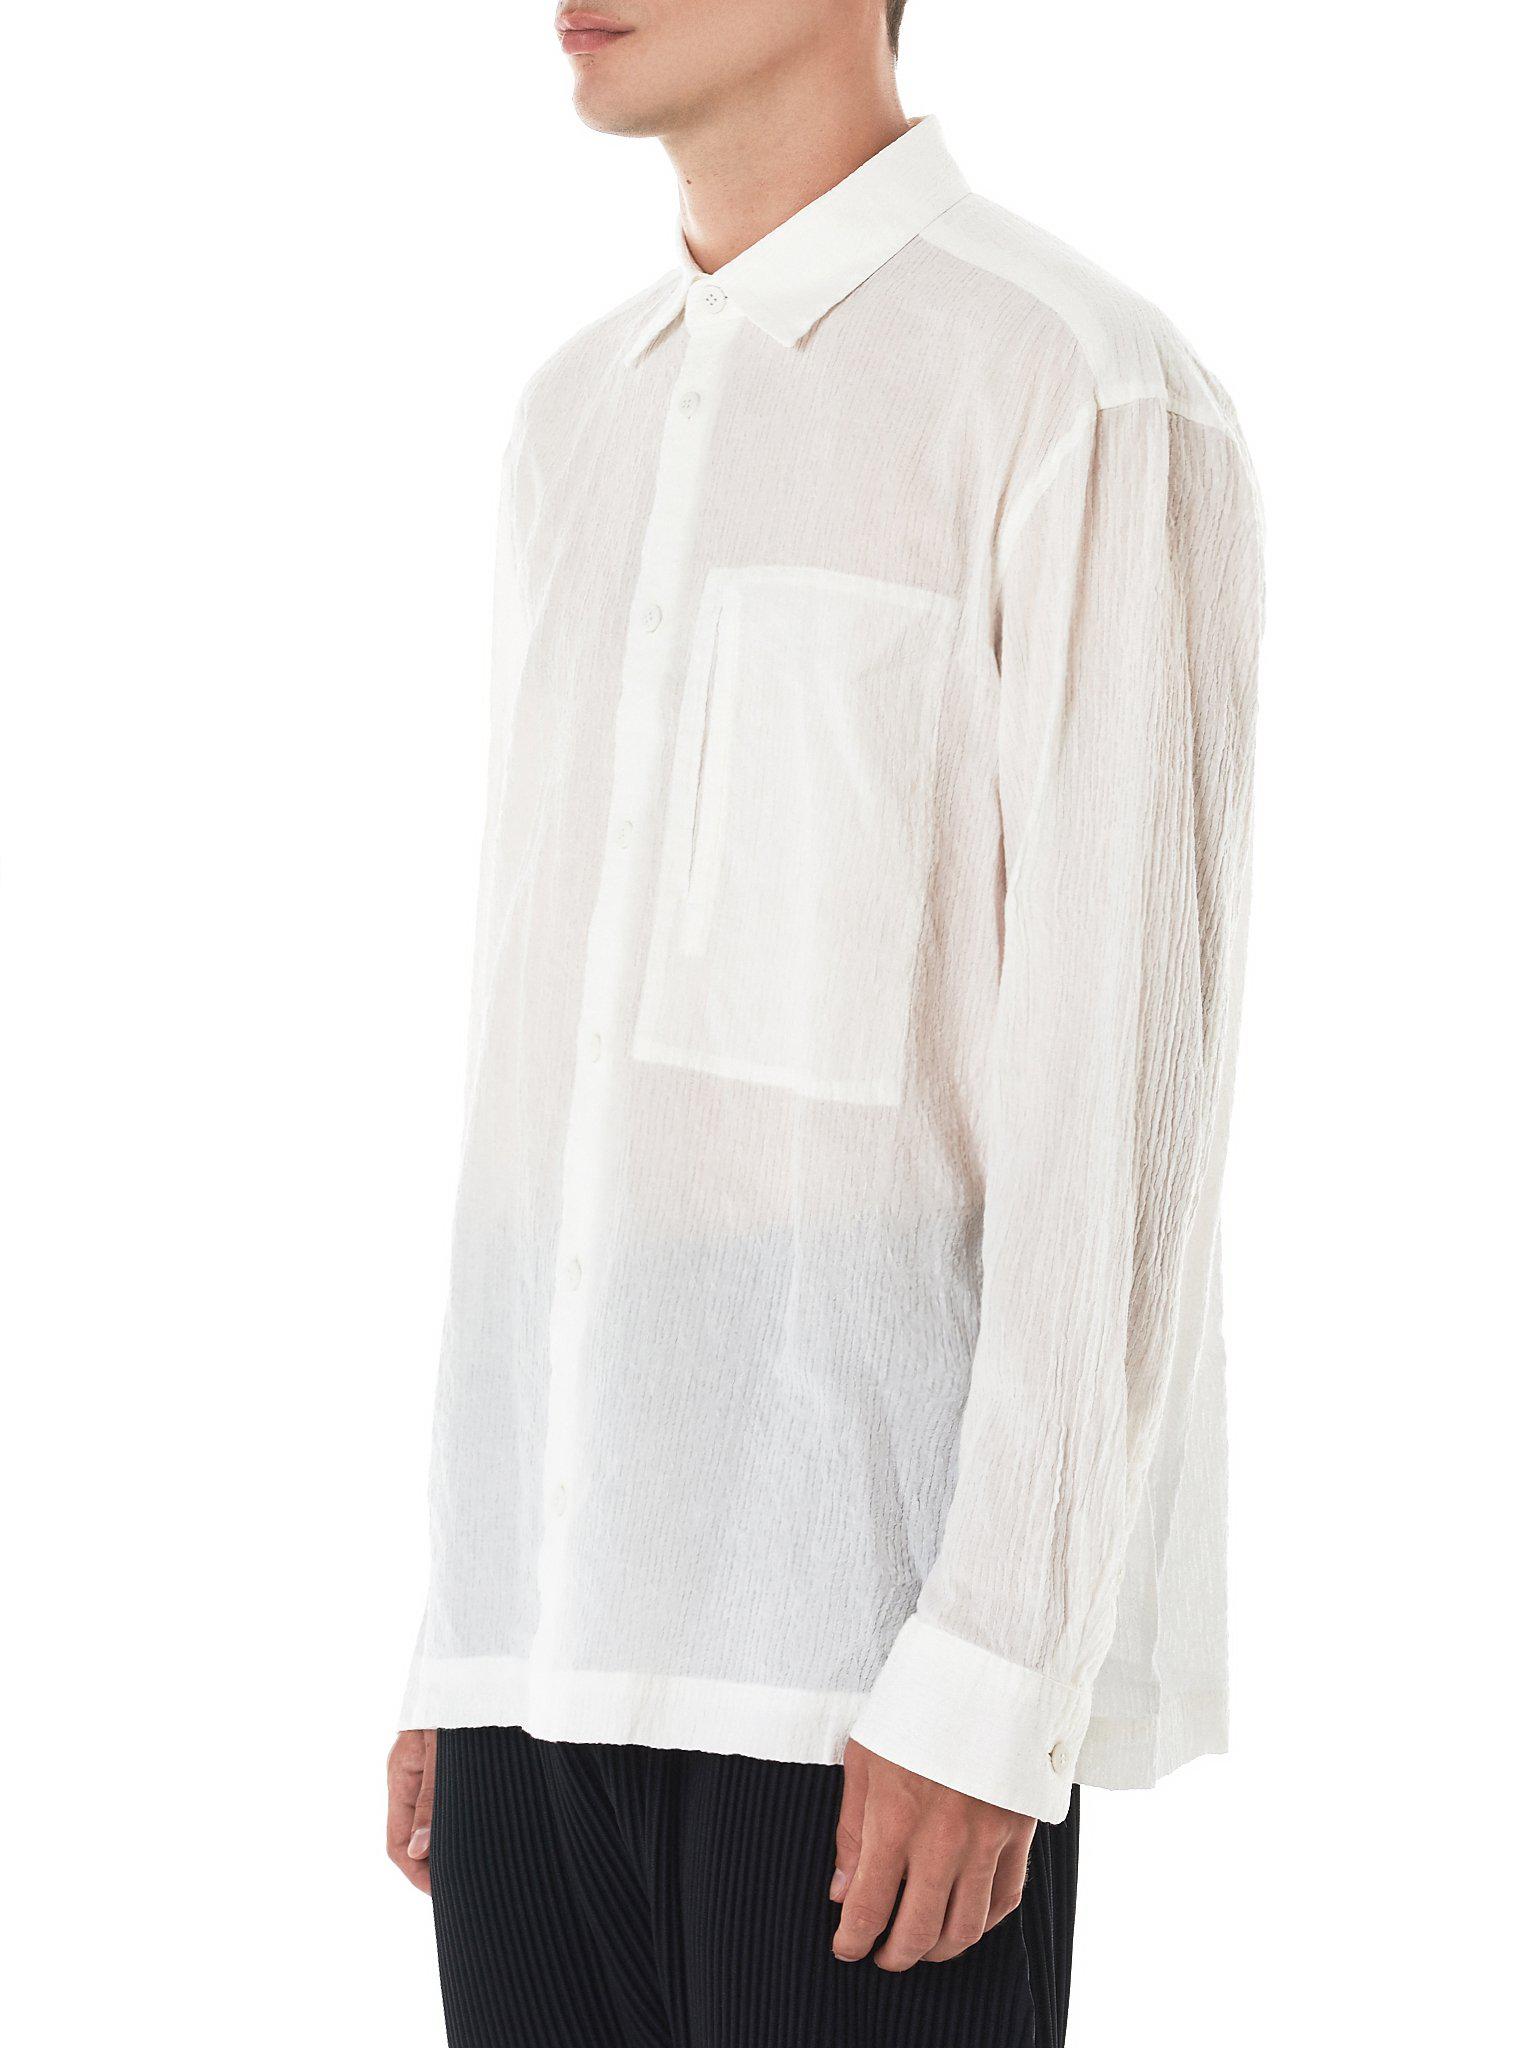 Issey Miyake Crepe-knit Button-down Shirt in White for Men - Lyst